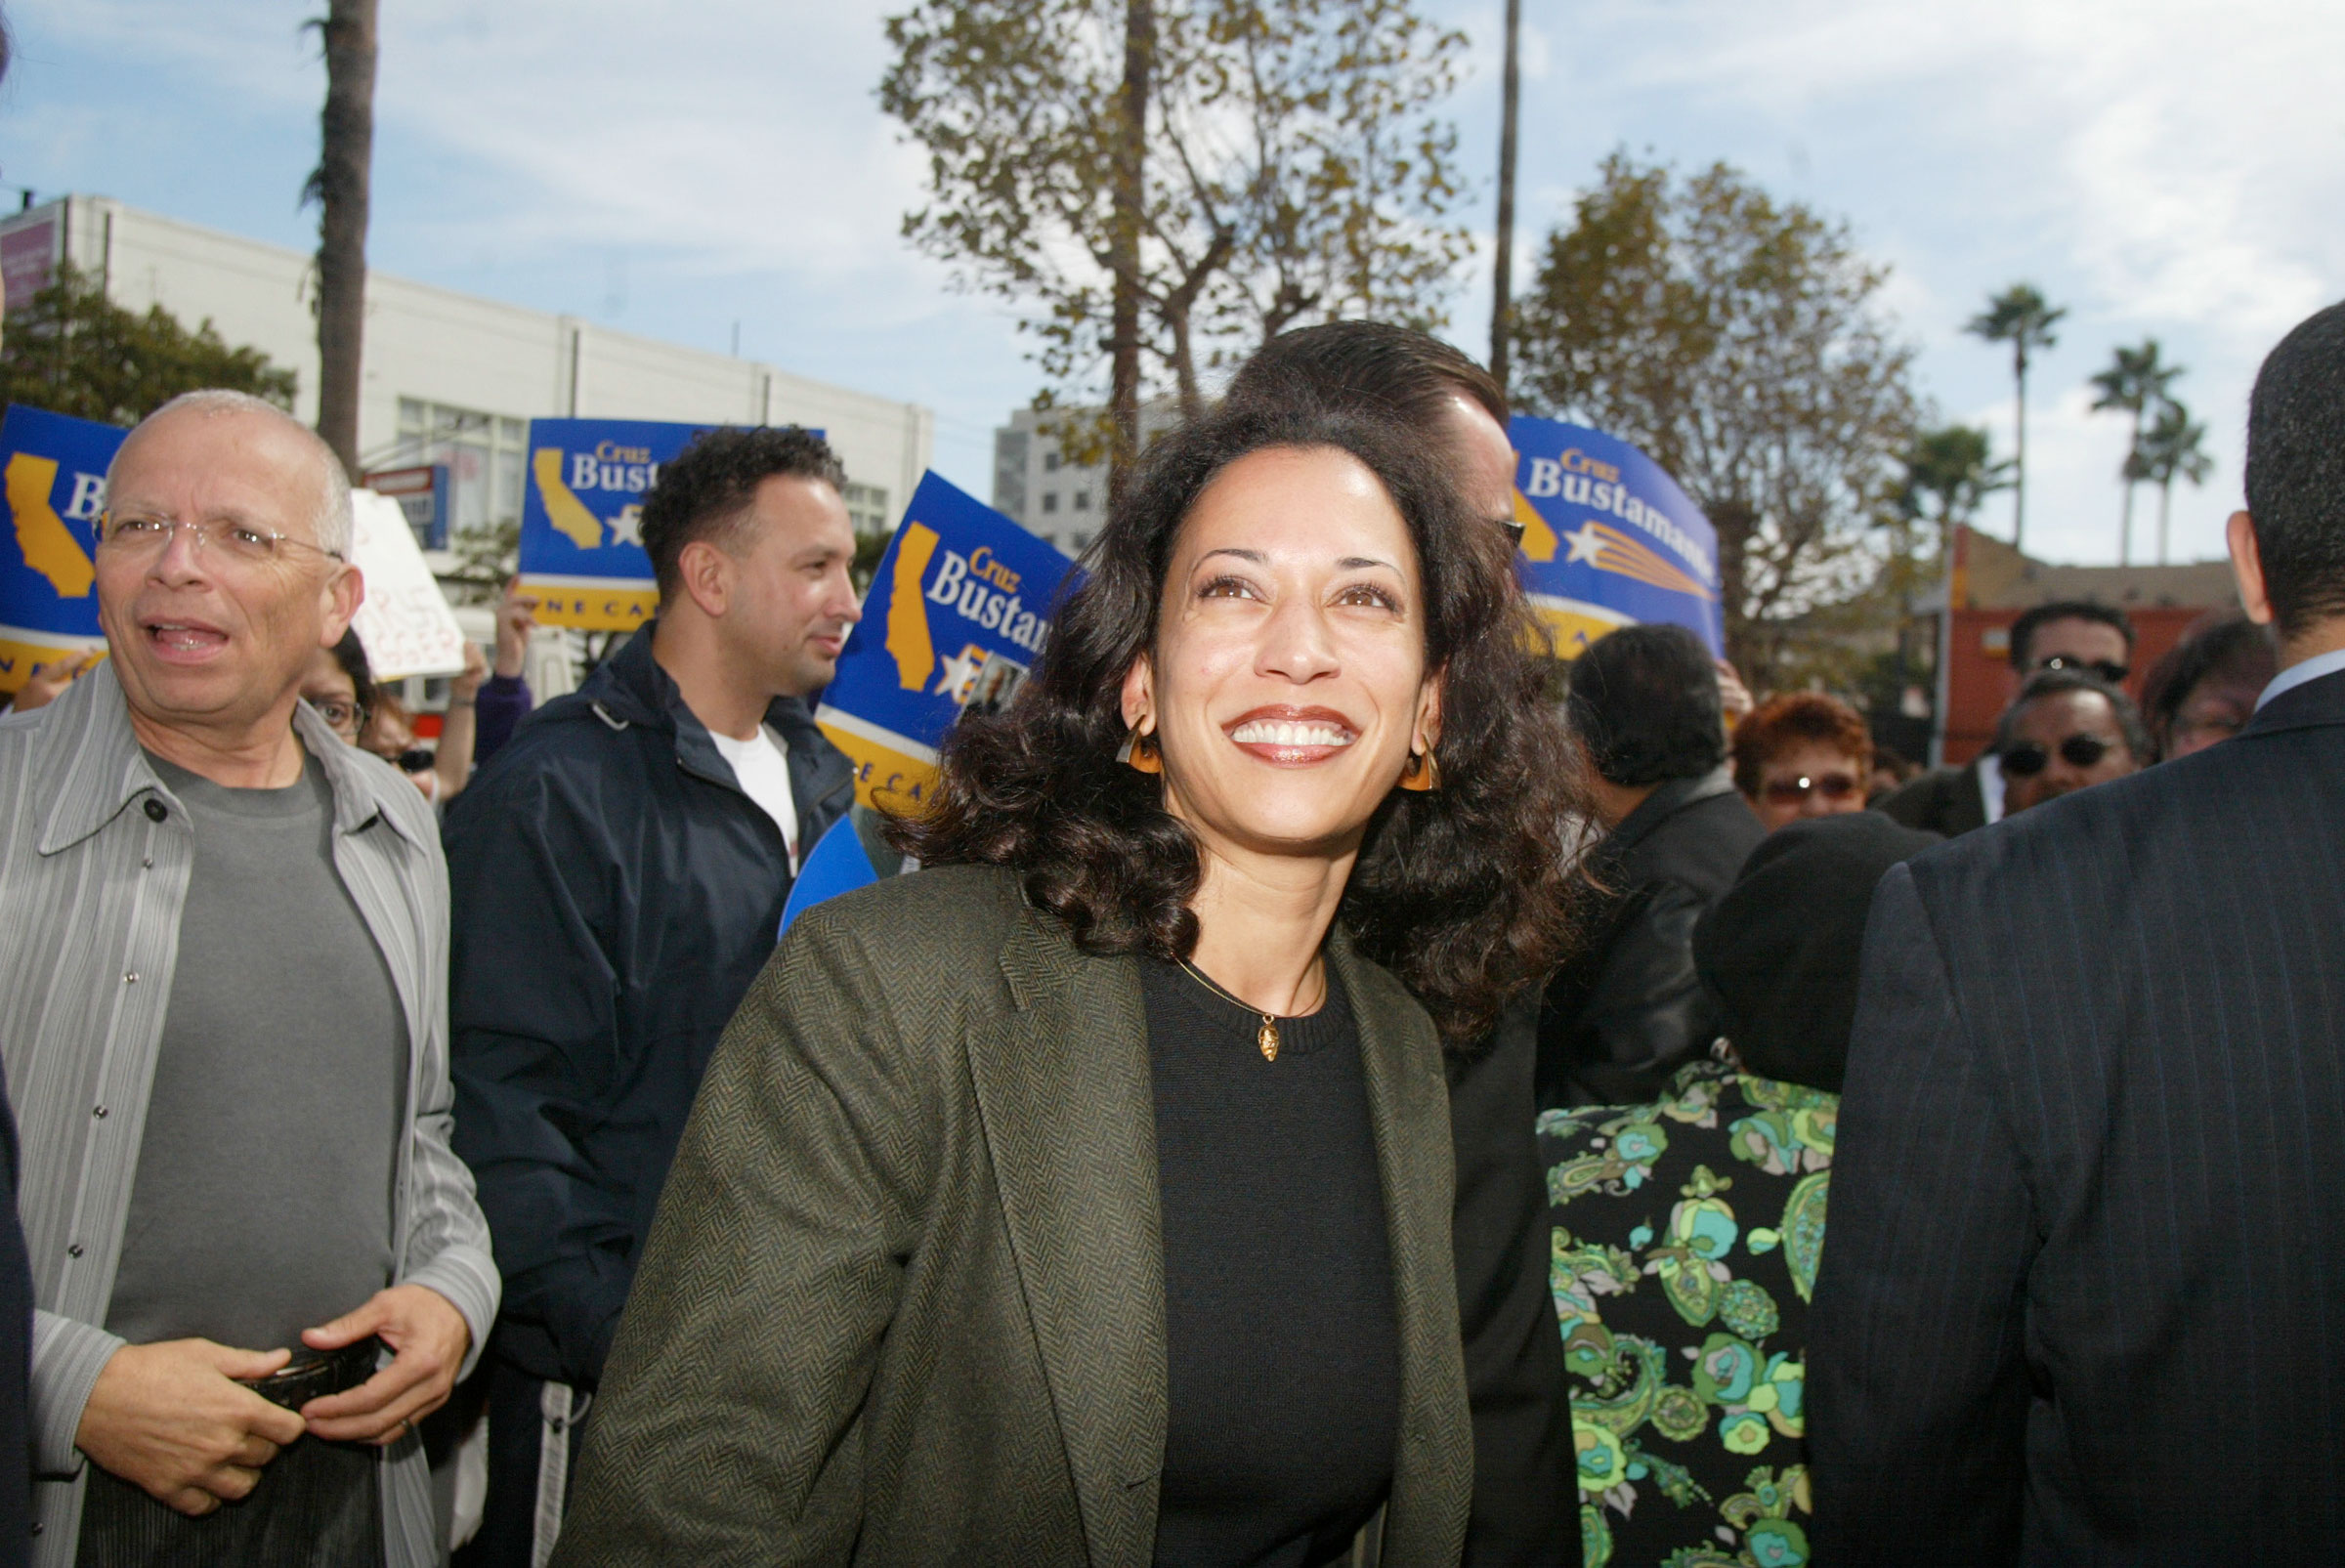 Kamala Harris meets with supporters in front of the 24th street BART station